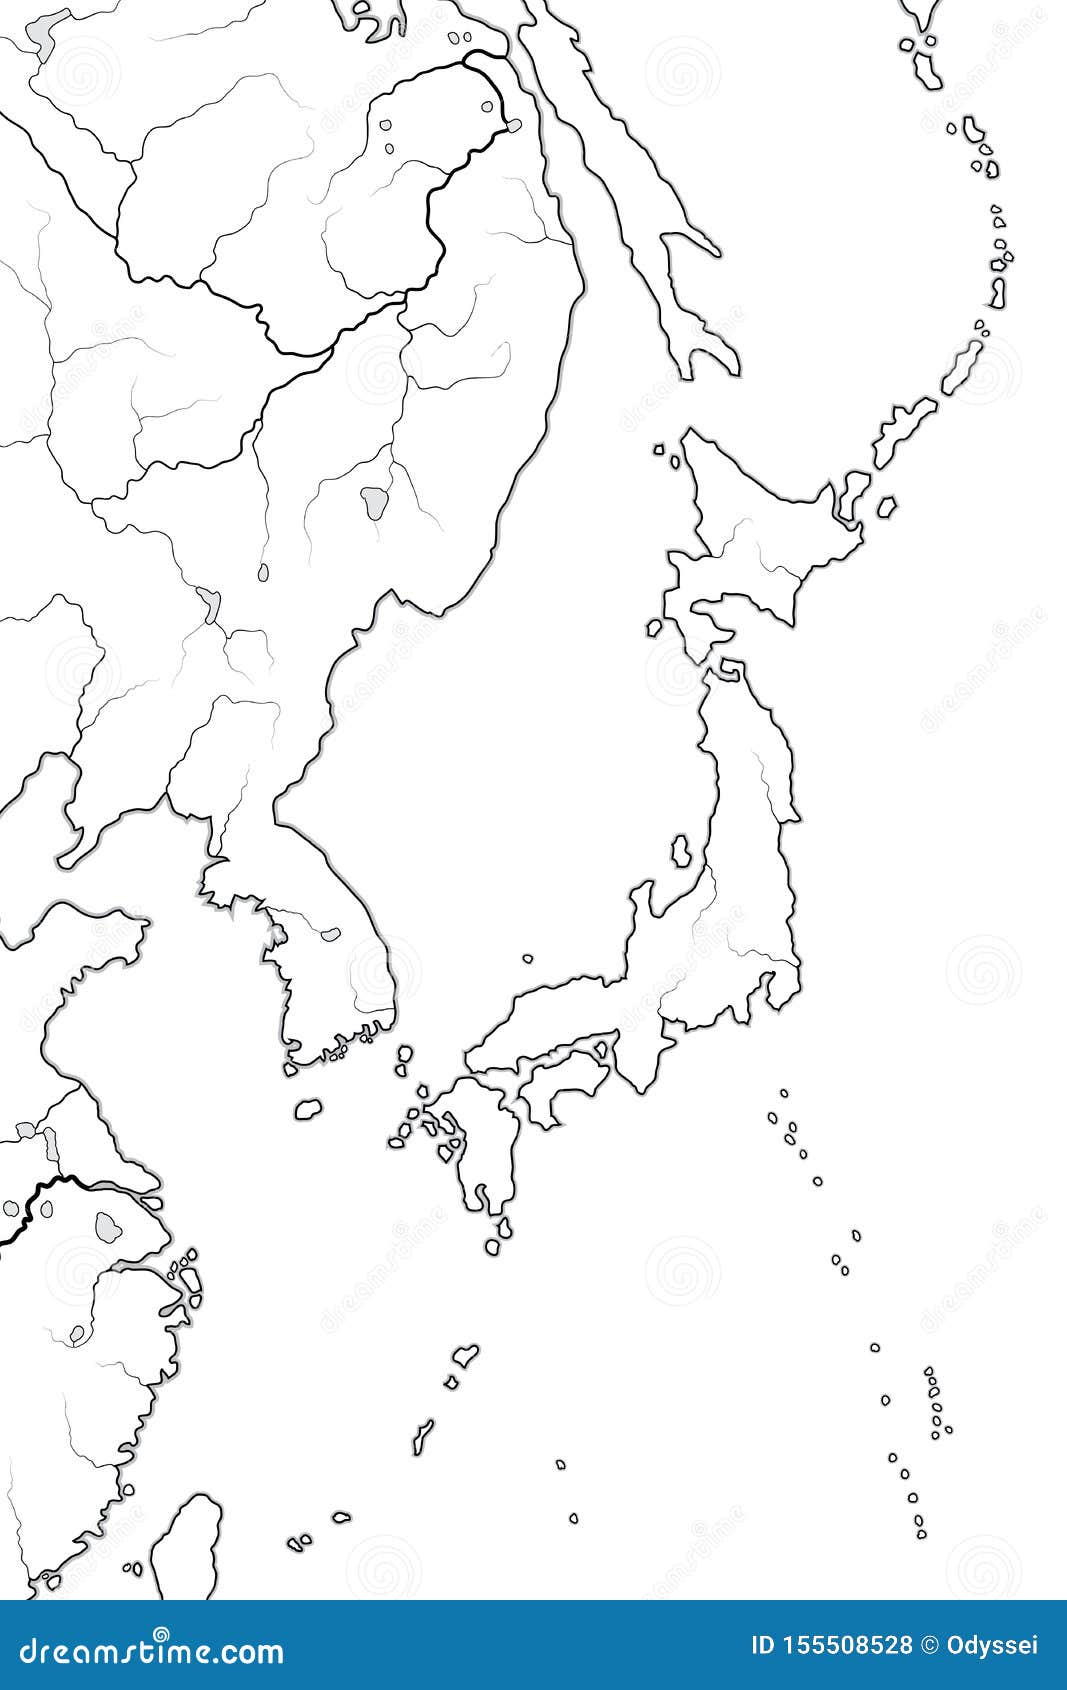 world map of japanese archipelago: japan (endonym: nippon/nihon), and its islands. geographic chart.